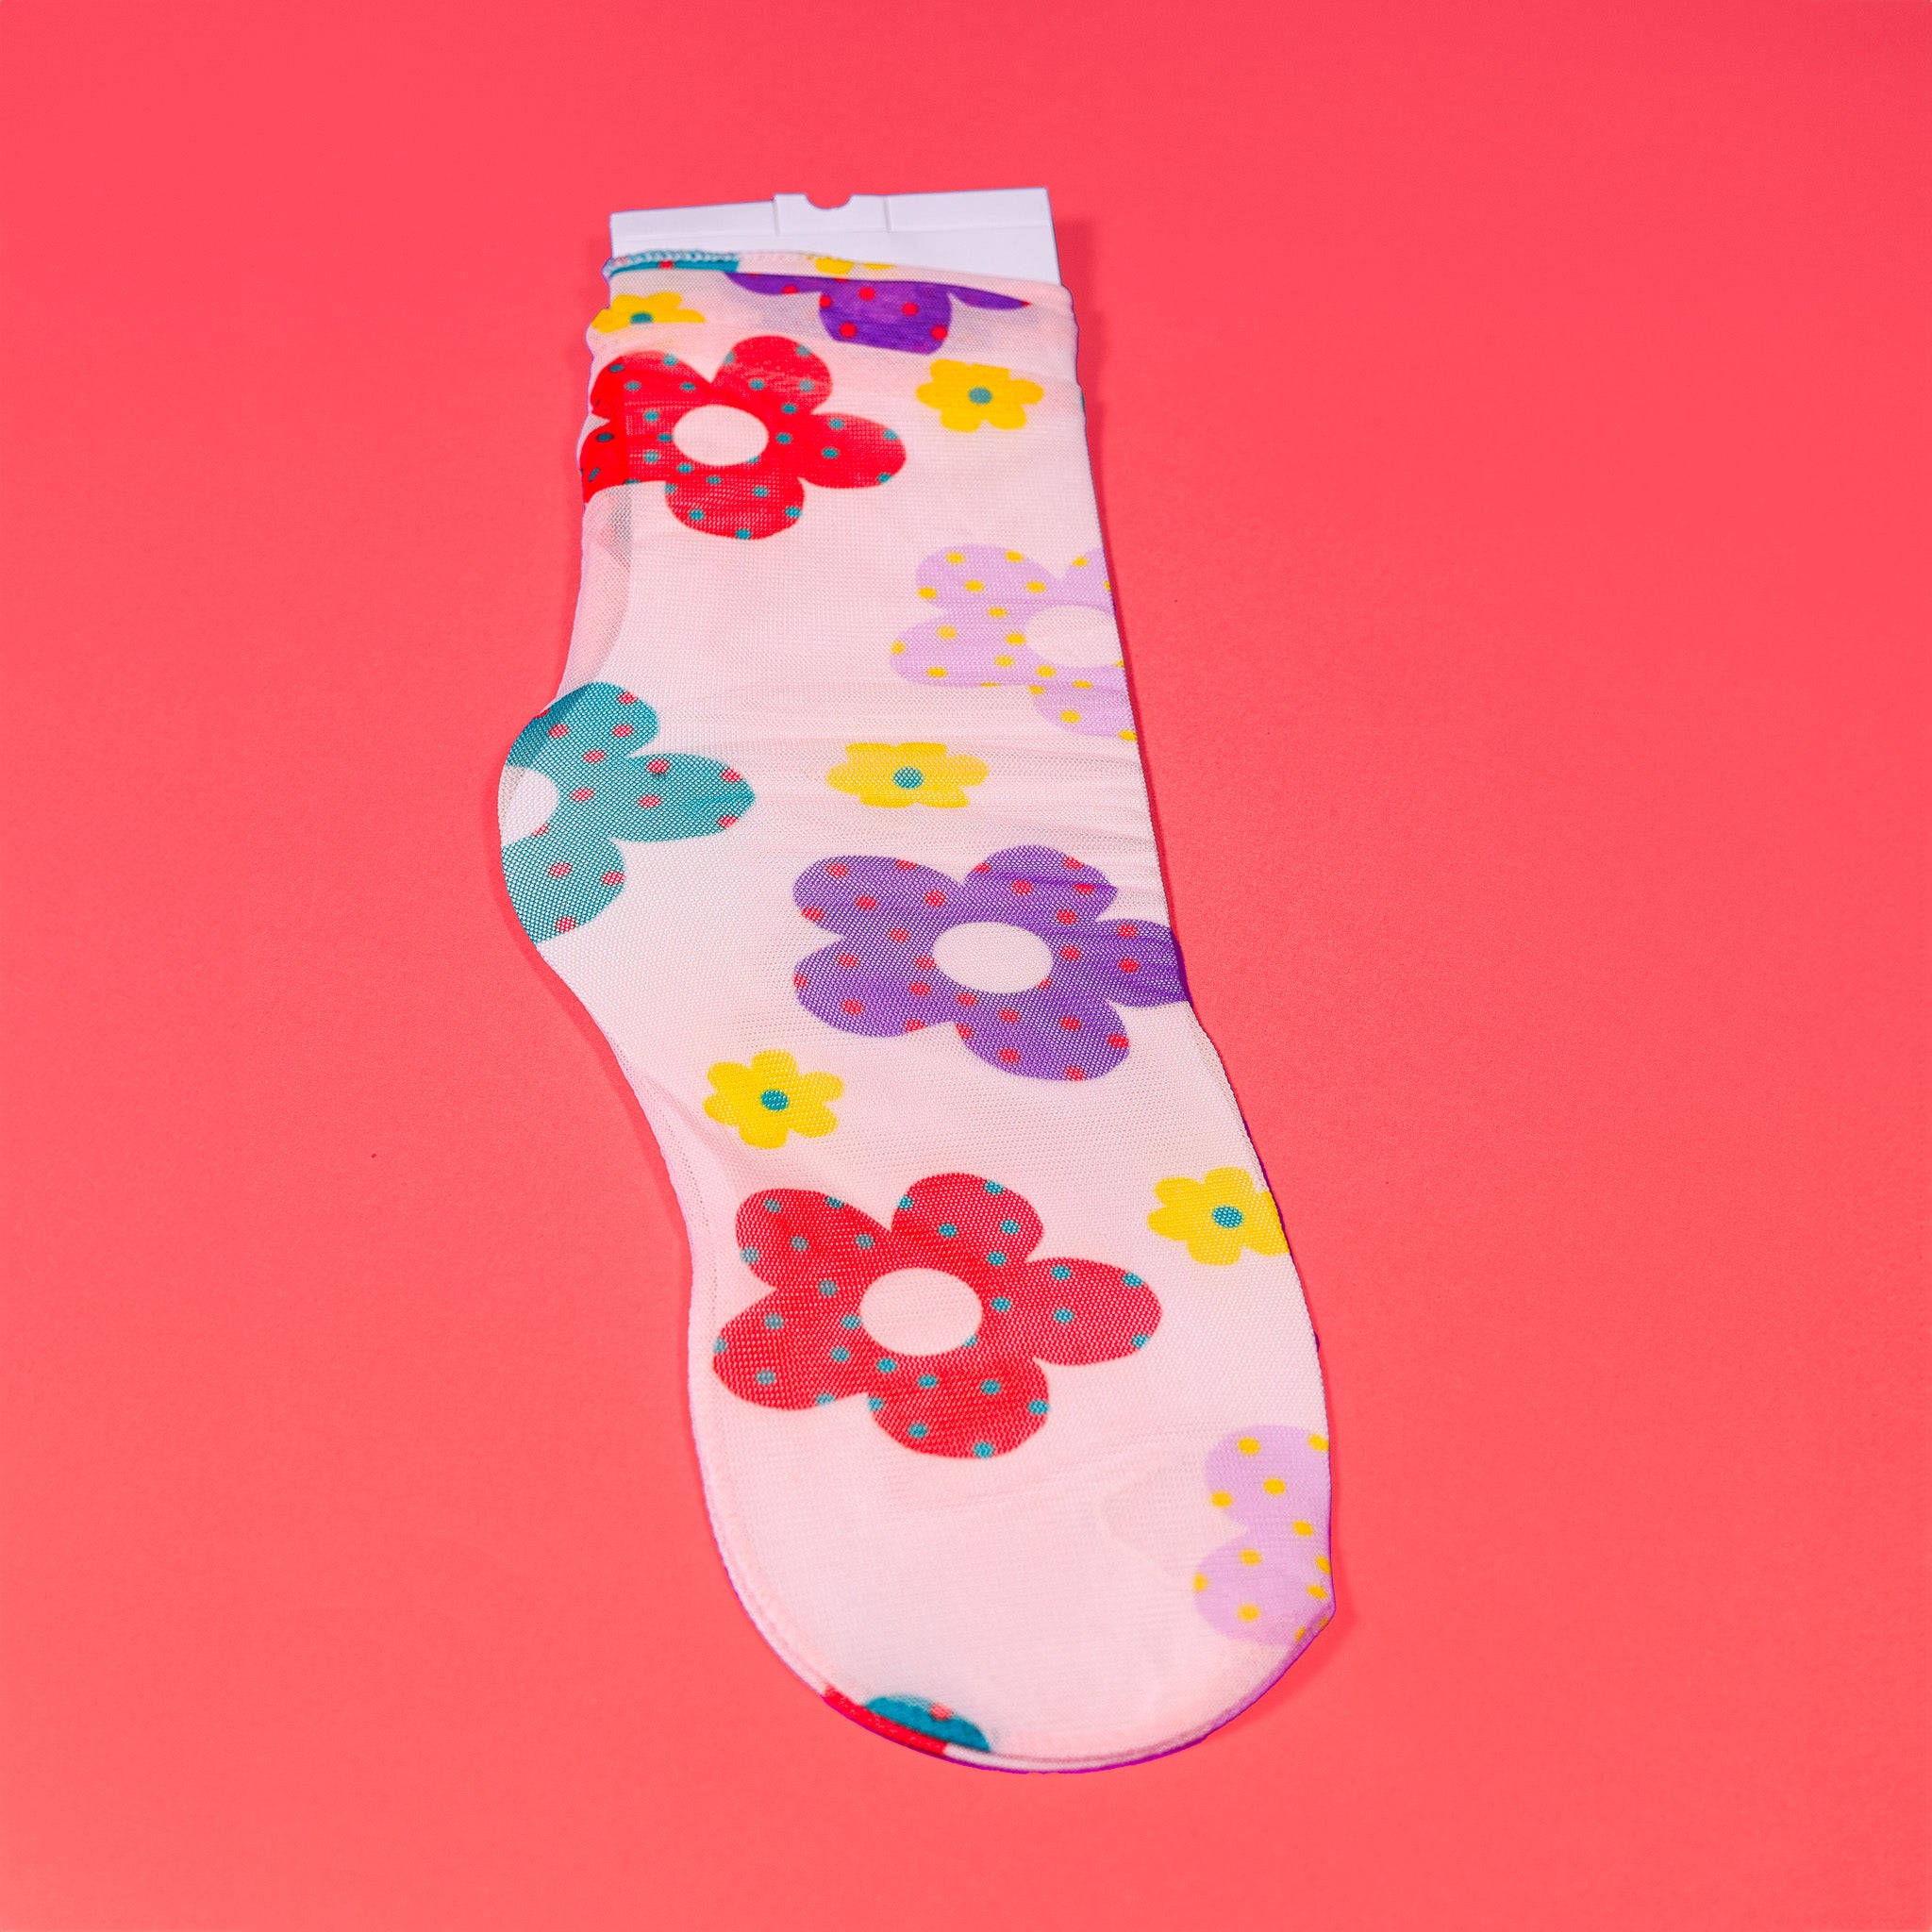 a white sock with flowers on it on a pink background